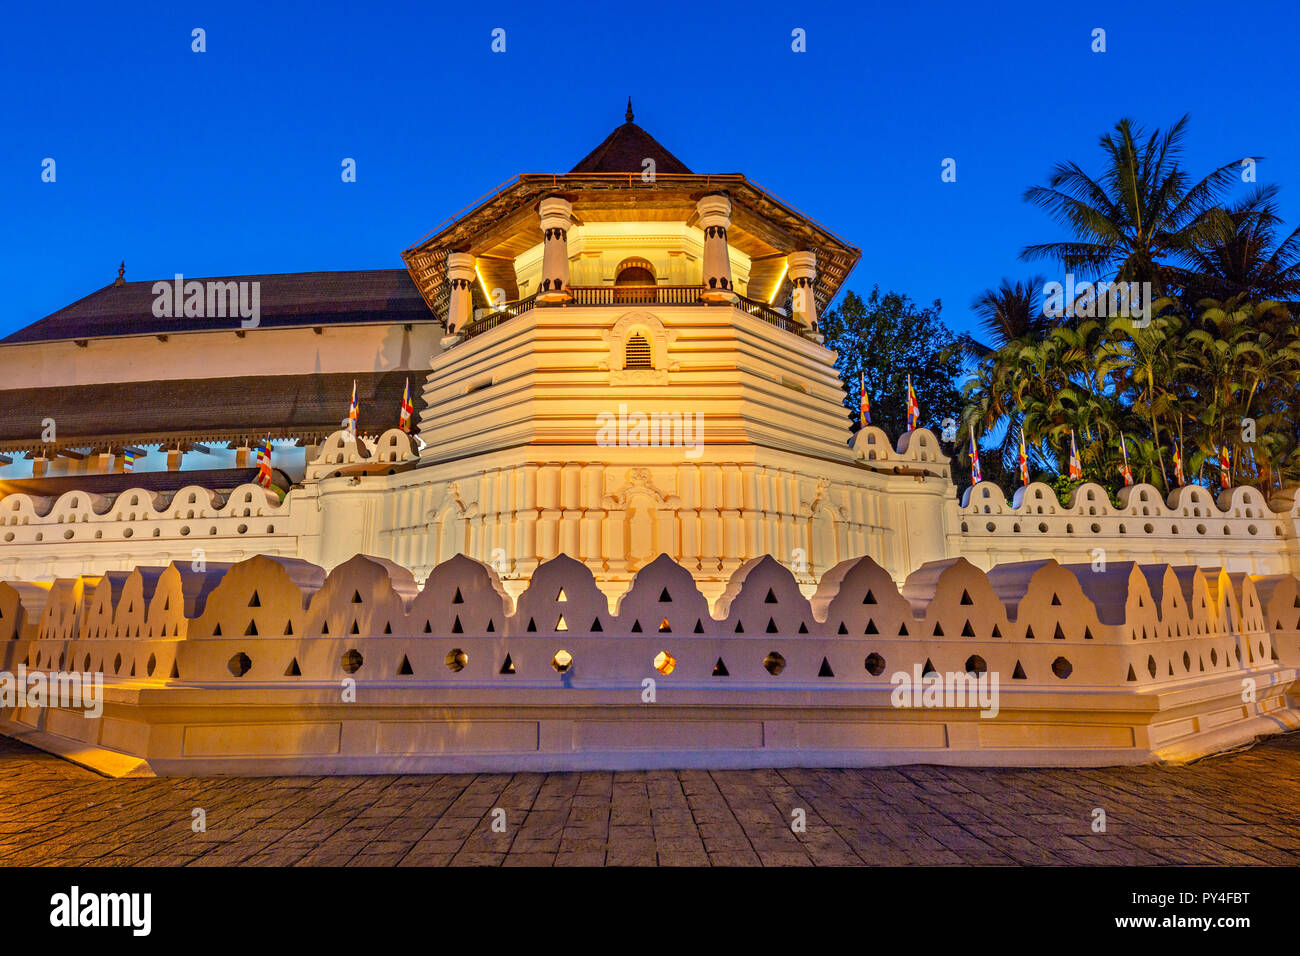 Temple of Tooth Relic at the twilight, in Kandy, Sri Lanka Stock Photo